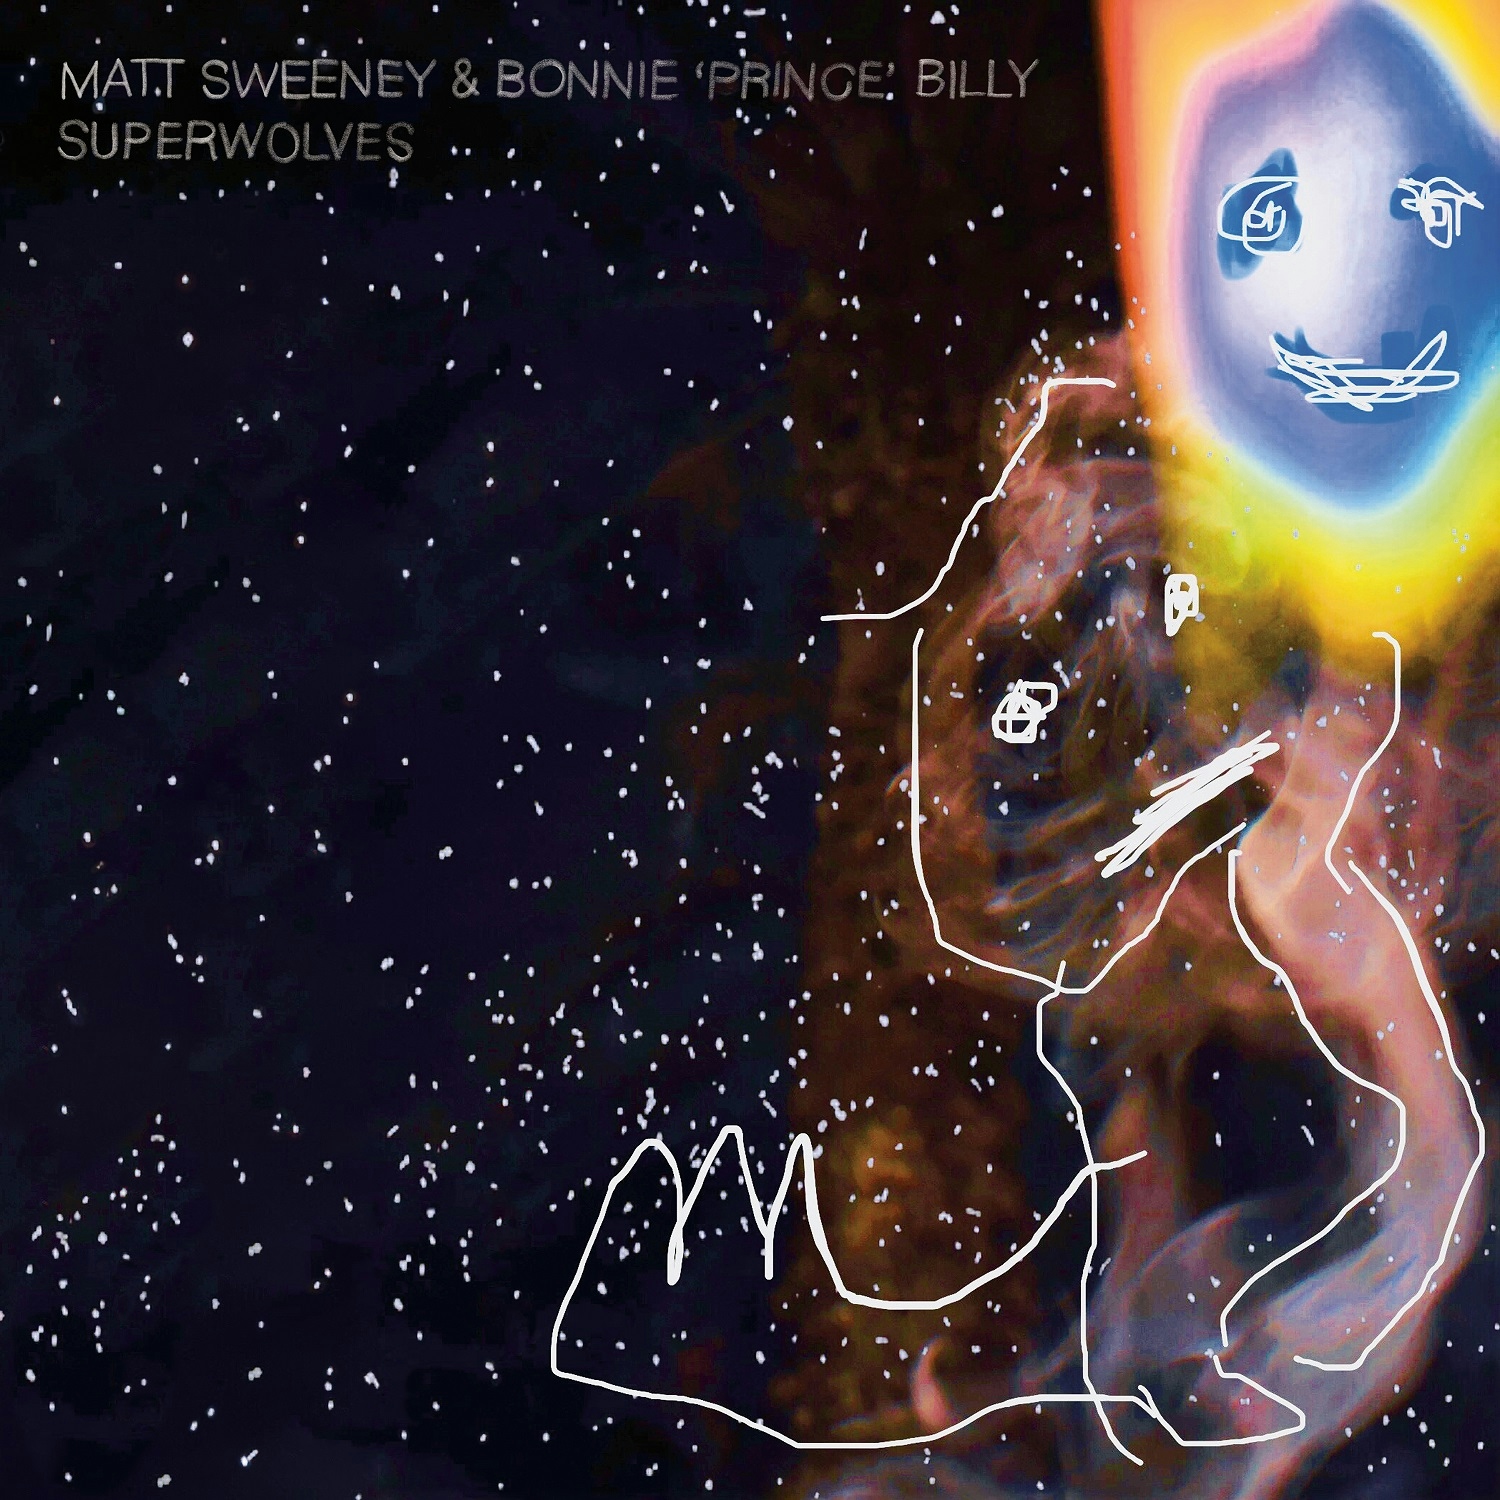 Album artwork for Superwolves by Matt Sweeney and Bonnie Prince Billy